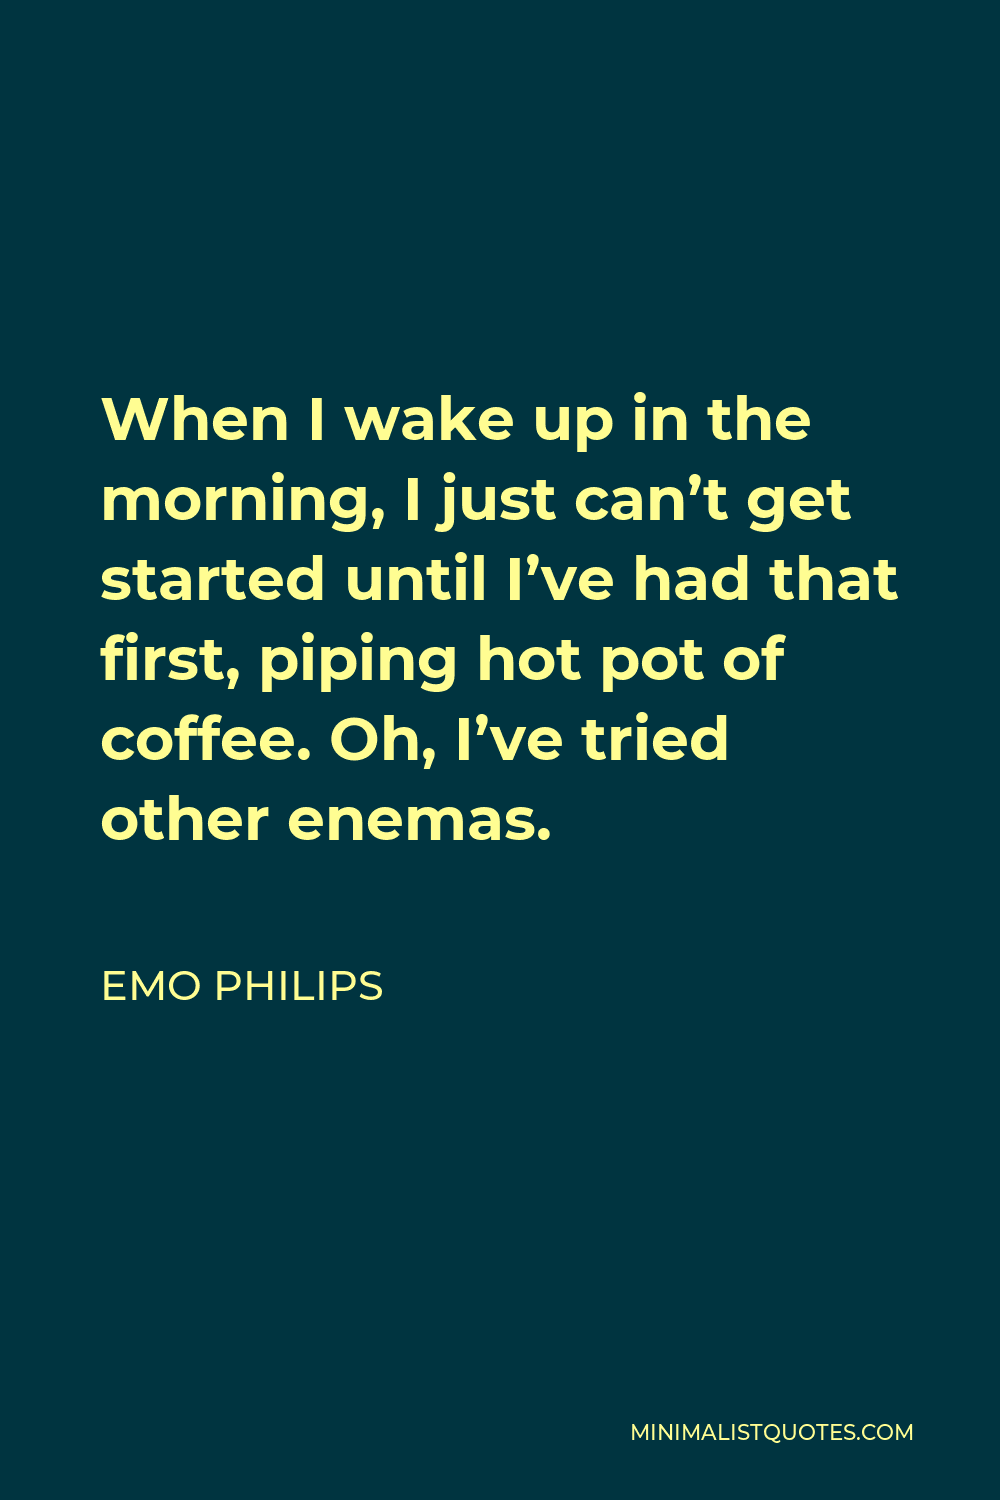 Emo Philips Quote - When I wake up in the morning, I just can’t get started until I’ve had that first, piping hot pot of coffee. Oh, I’ve tried other enemas.